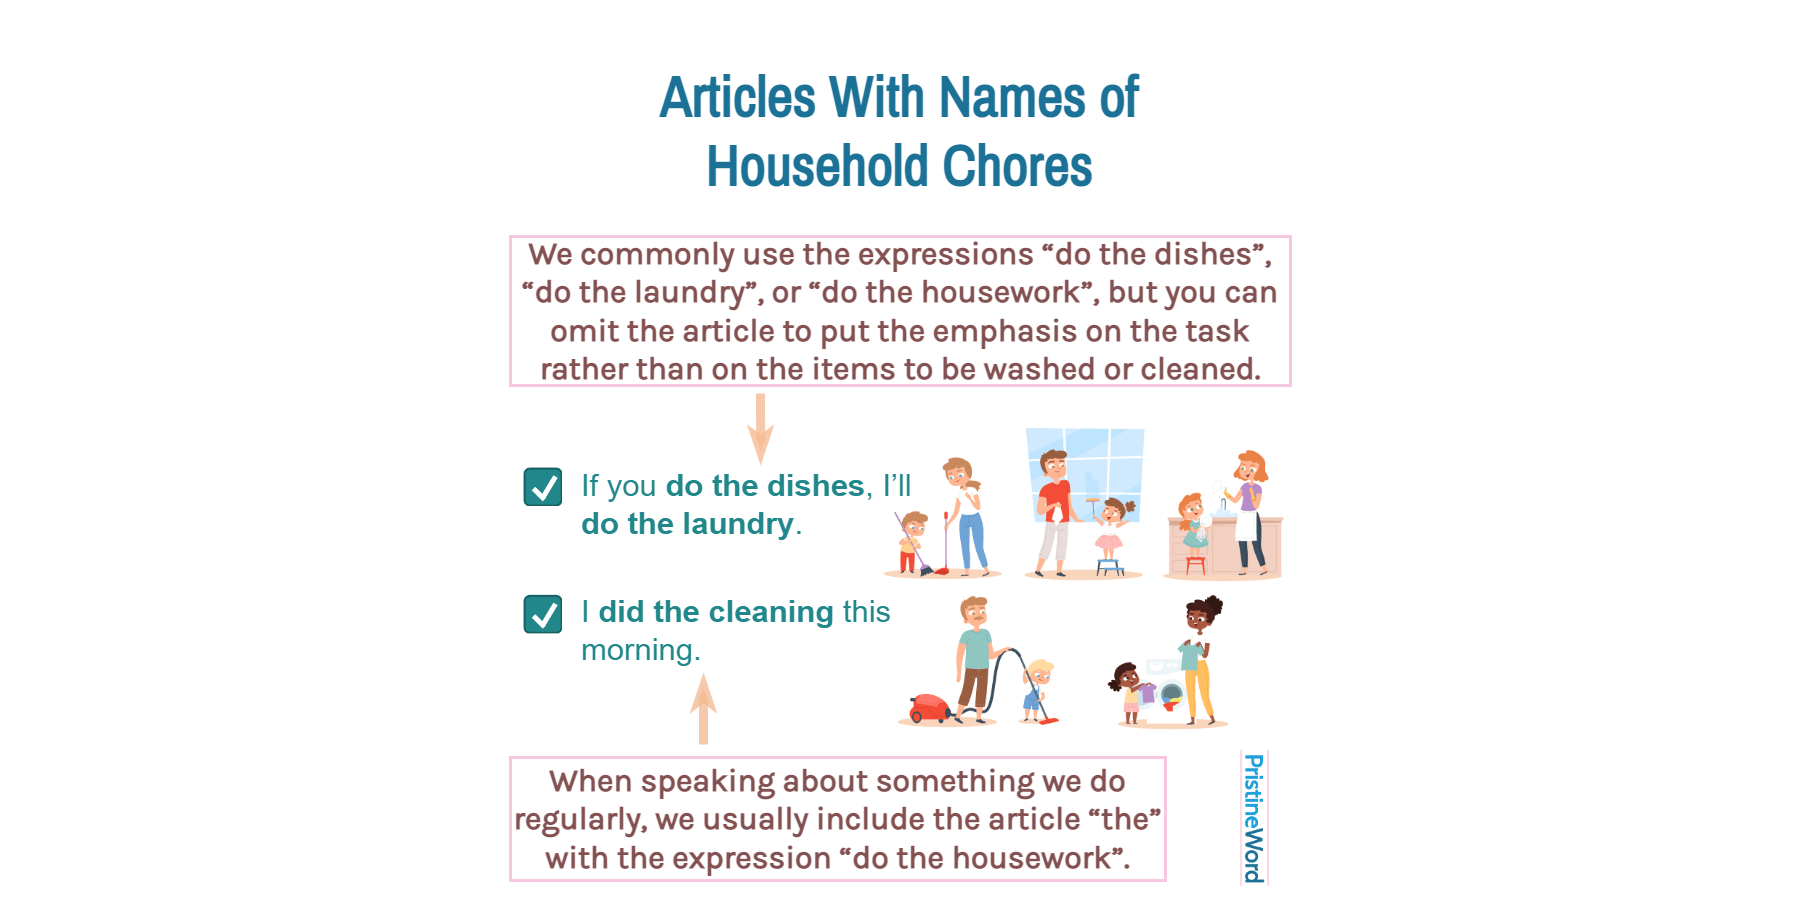 Articles With Names of Household Chores